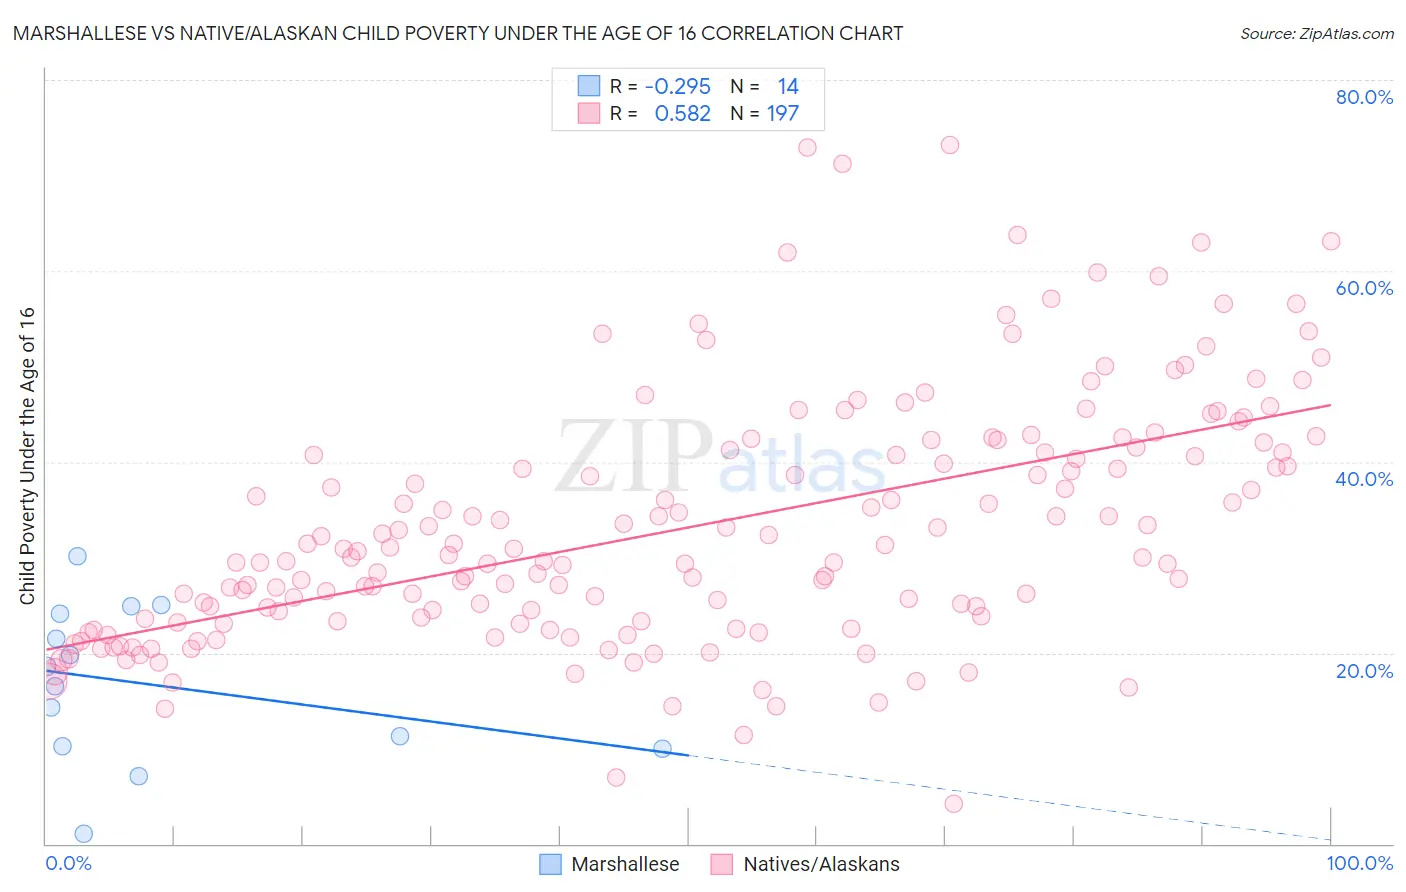 Marshallese vs Native/Alaskan Child Poverty Under the Age of 16